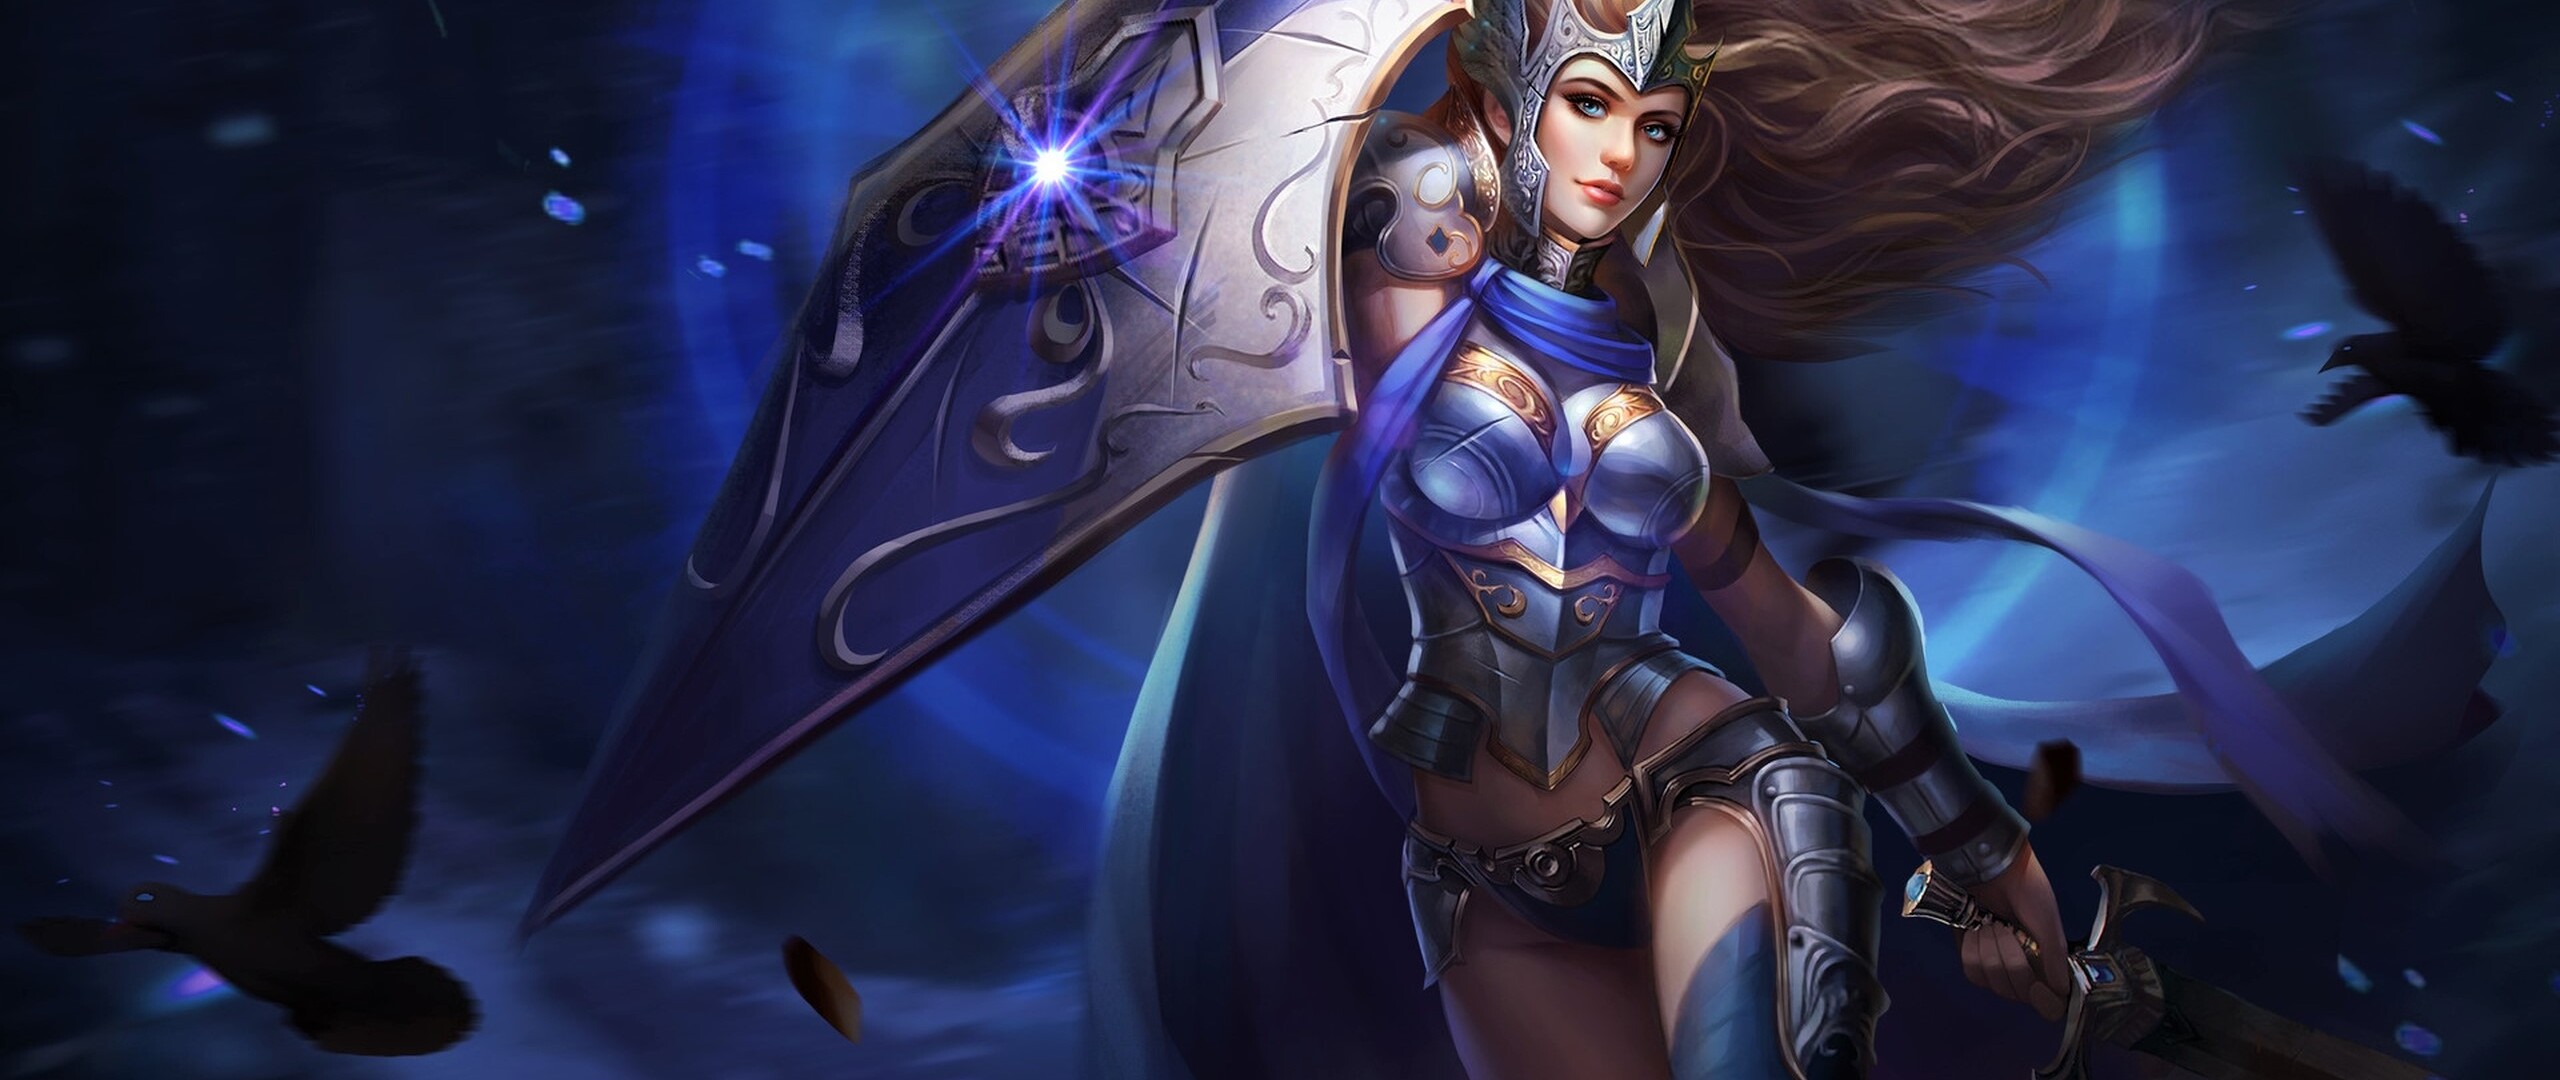 Fantasy Warrior Girl With Shield And Sword 2560x1080 Resolution HD 4k Wallpaper, Image, Background, Photo and Picture